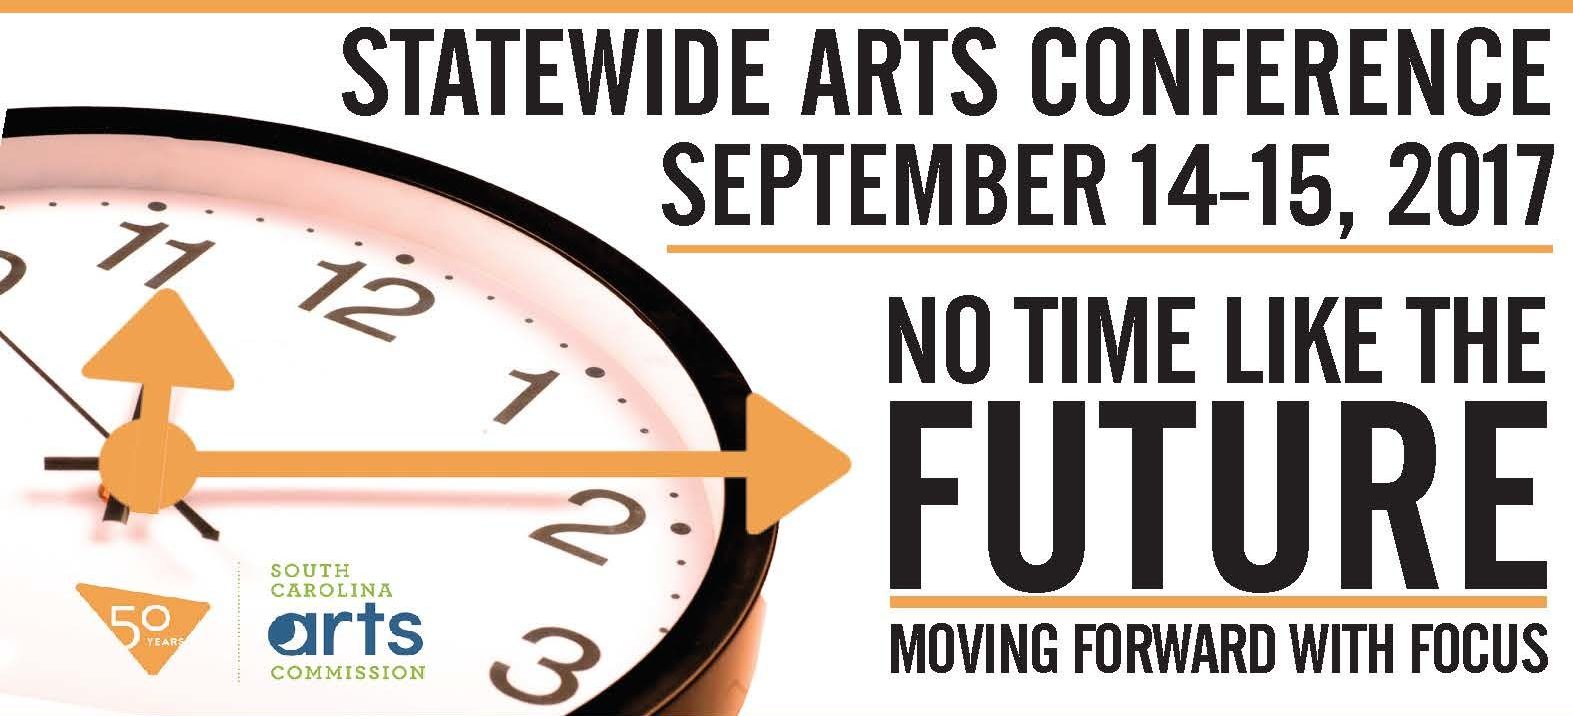 Reserve your space at the Statewide Arts Conference!